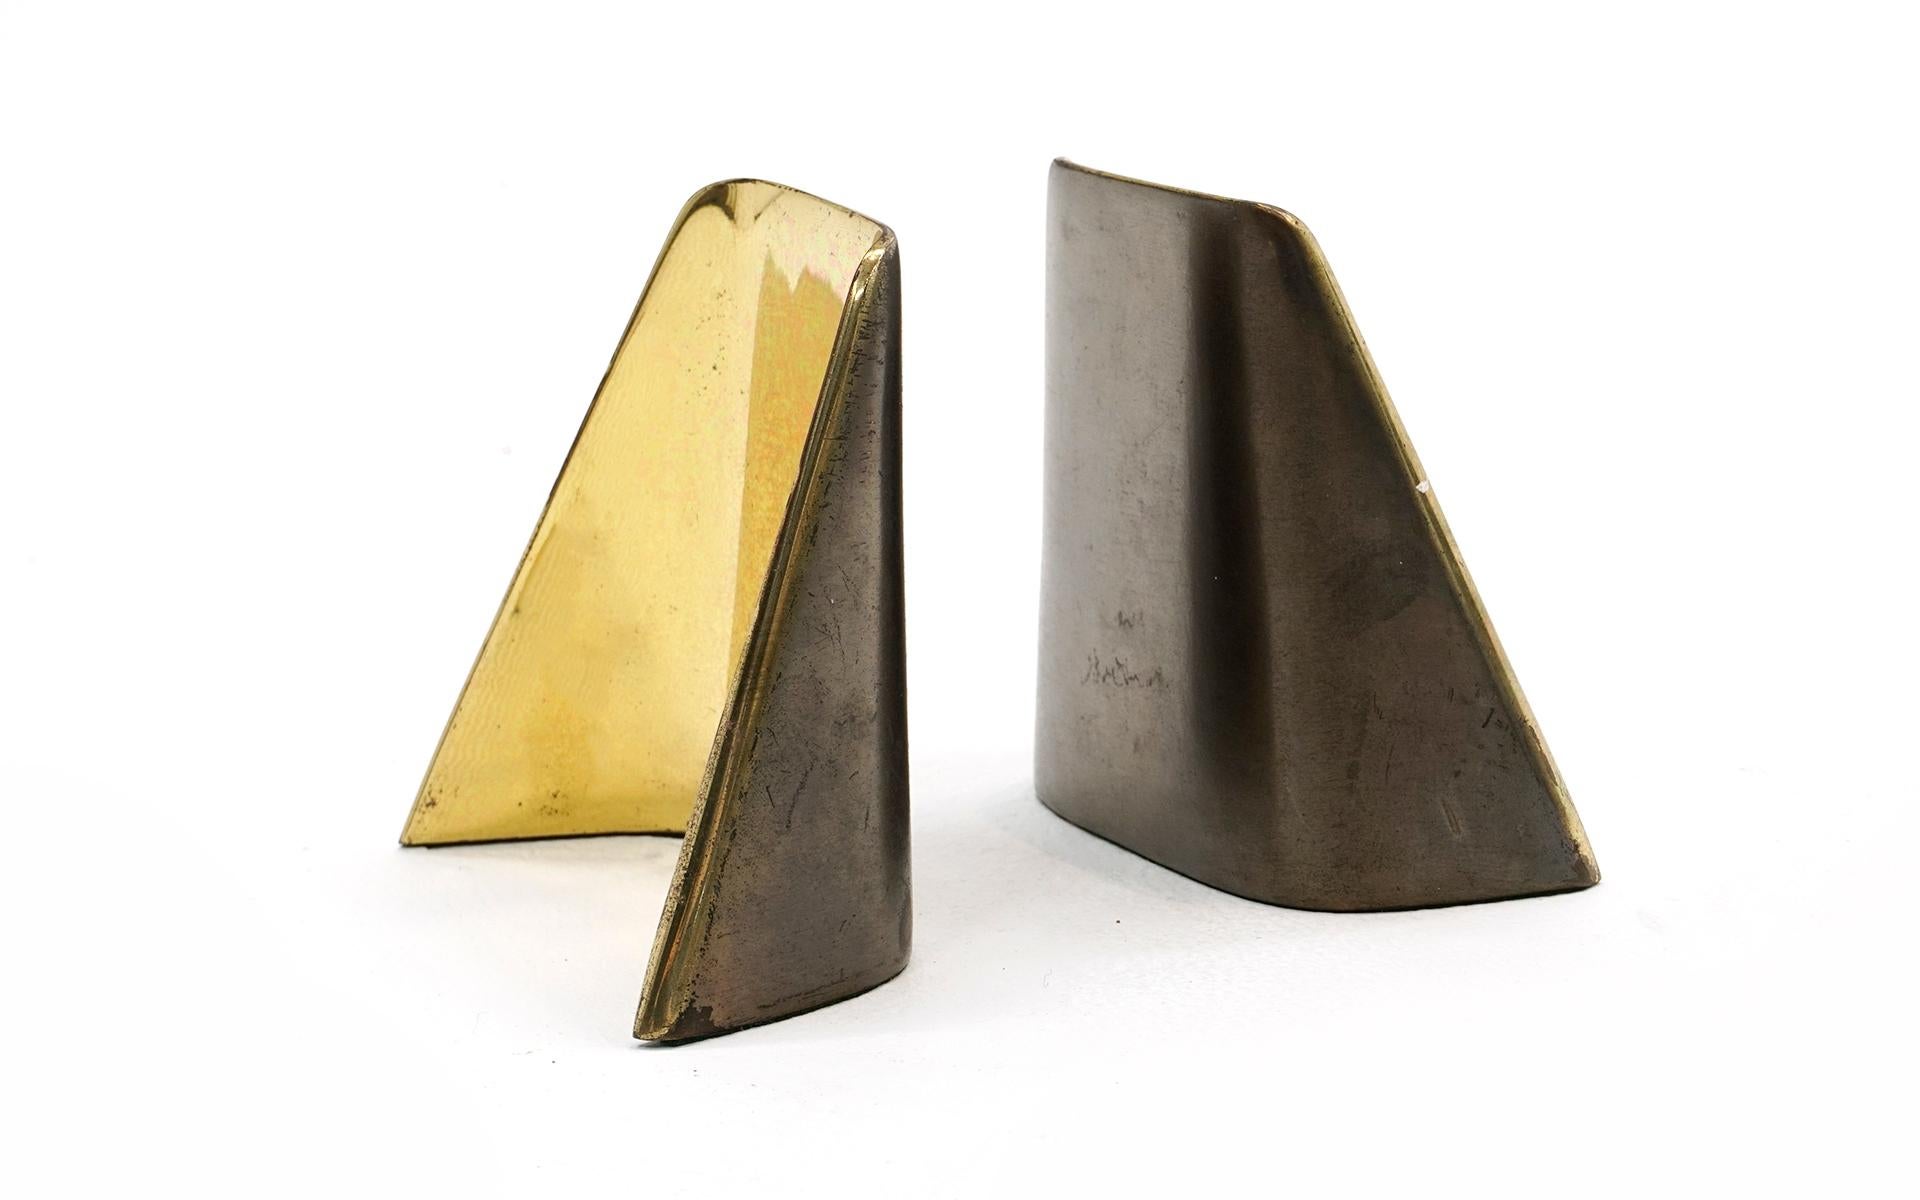 Pair of Ben Seibel bookends. Polished brass on one side and patinated brass on the other. Very good condition with very few signs of wear. Ready to use.